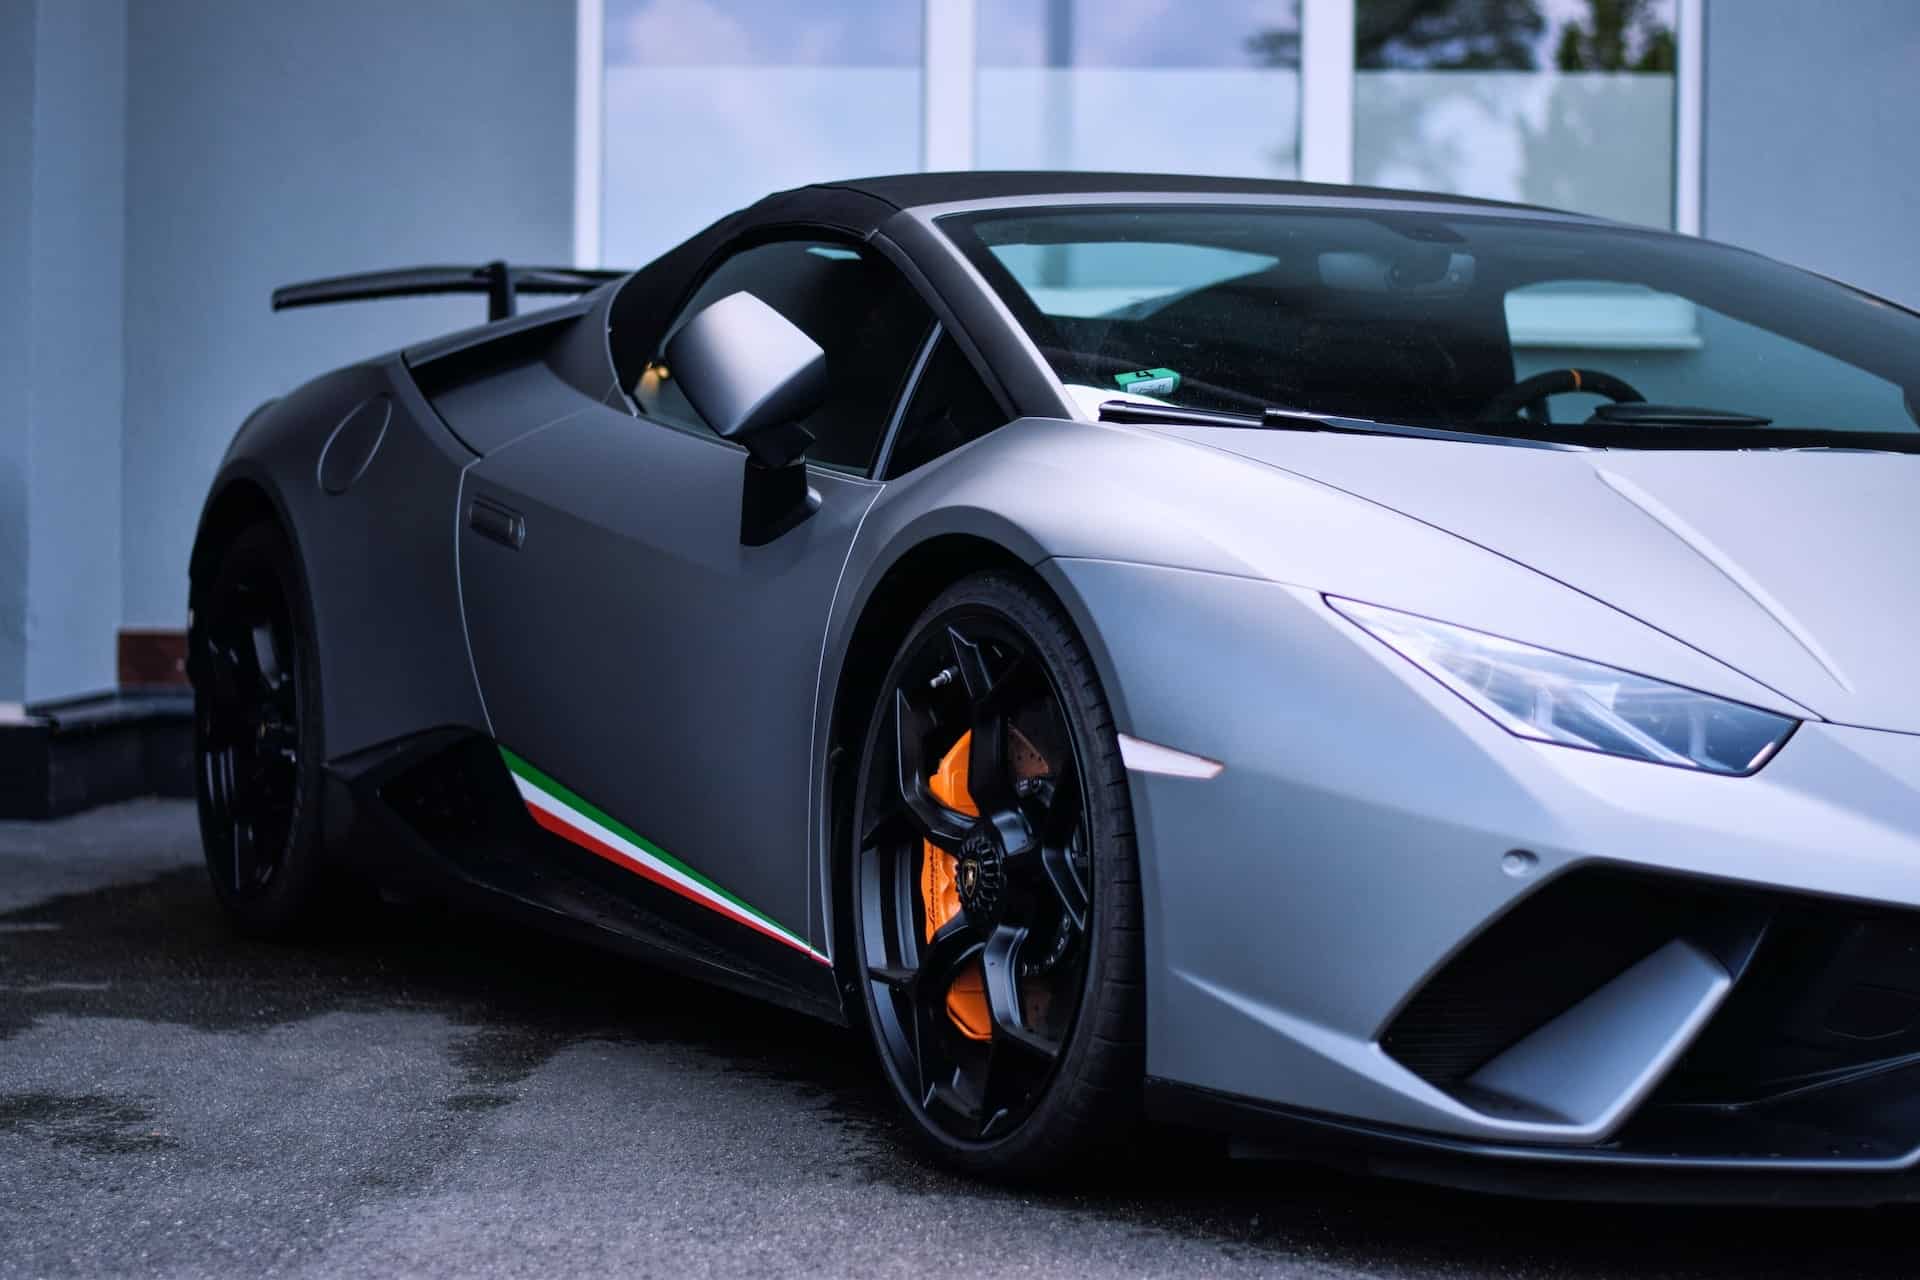 Can You Daily Drive an Exotic Car?